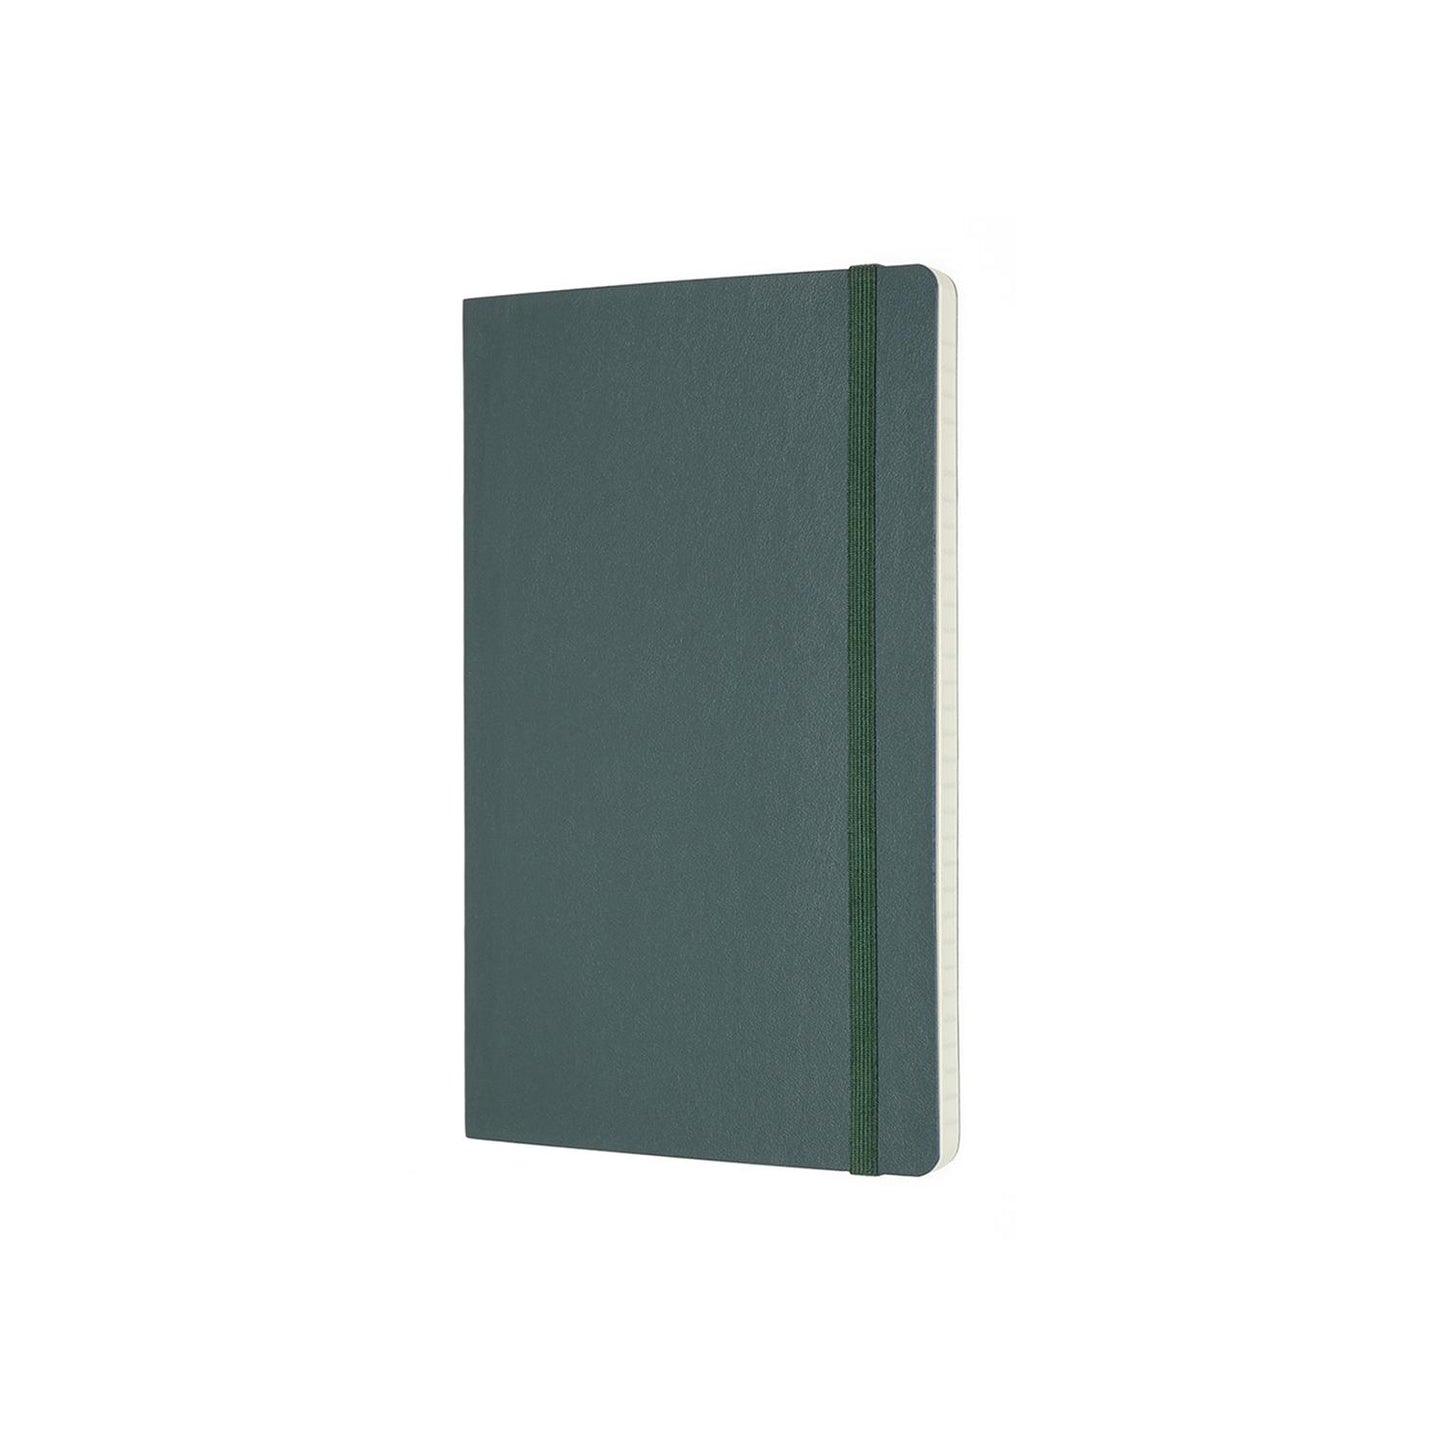 Professional Large Soft Cover Notebook Forest Green